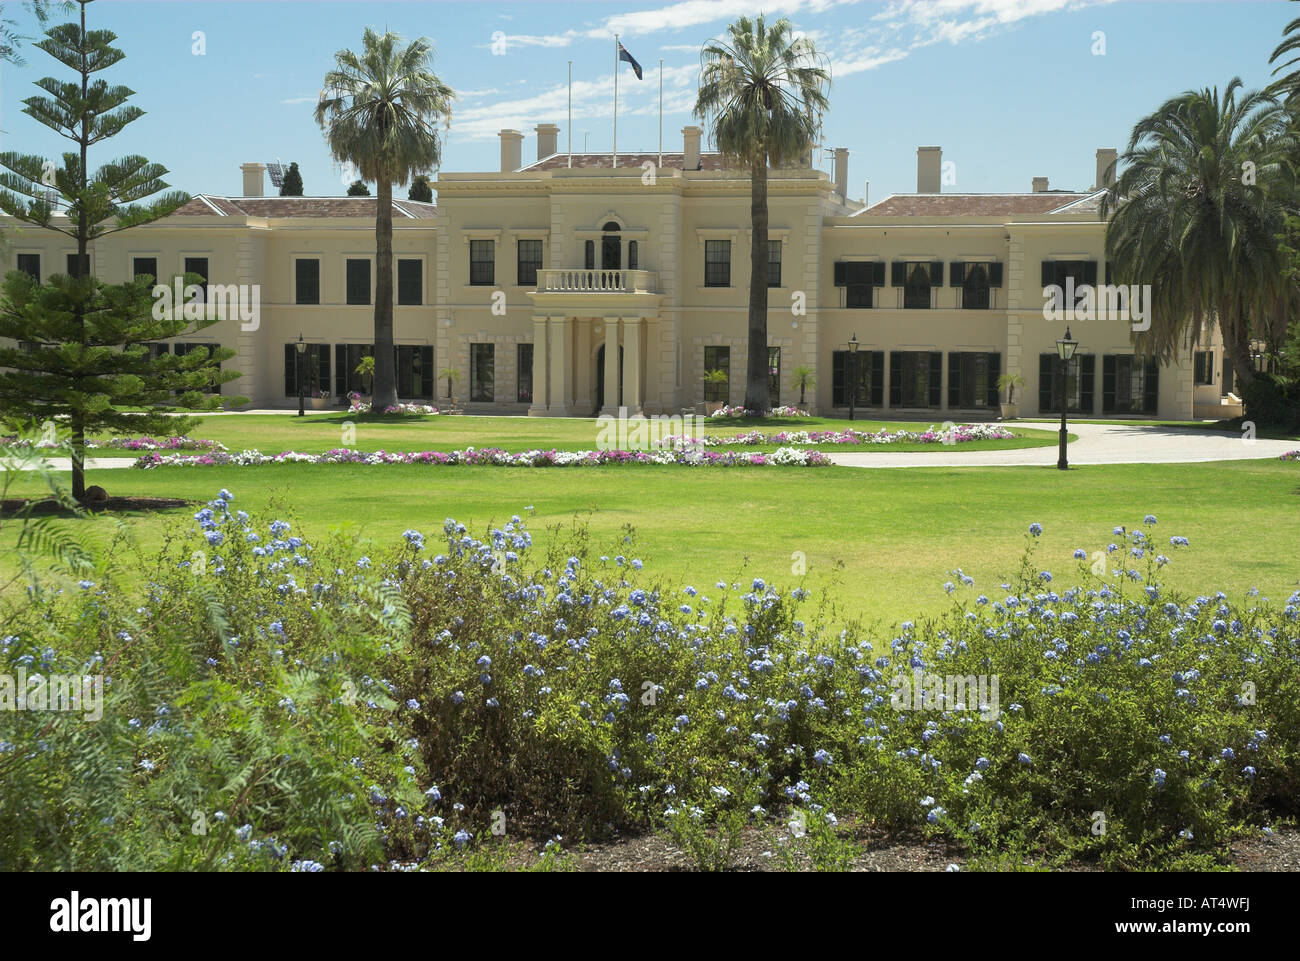 Exterior view of Government House, corner of King William Road and North Terrace, Adelaide, South Australia Stock Photo